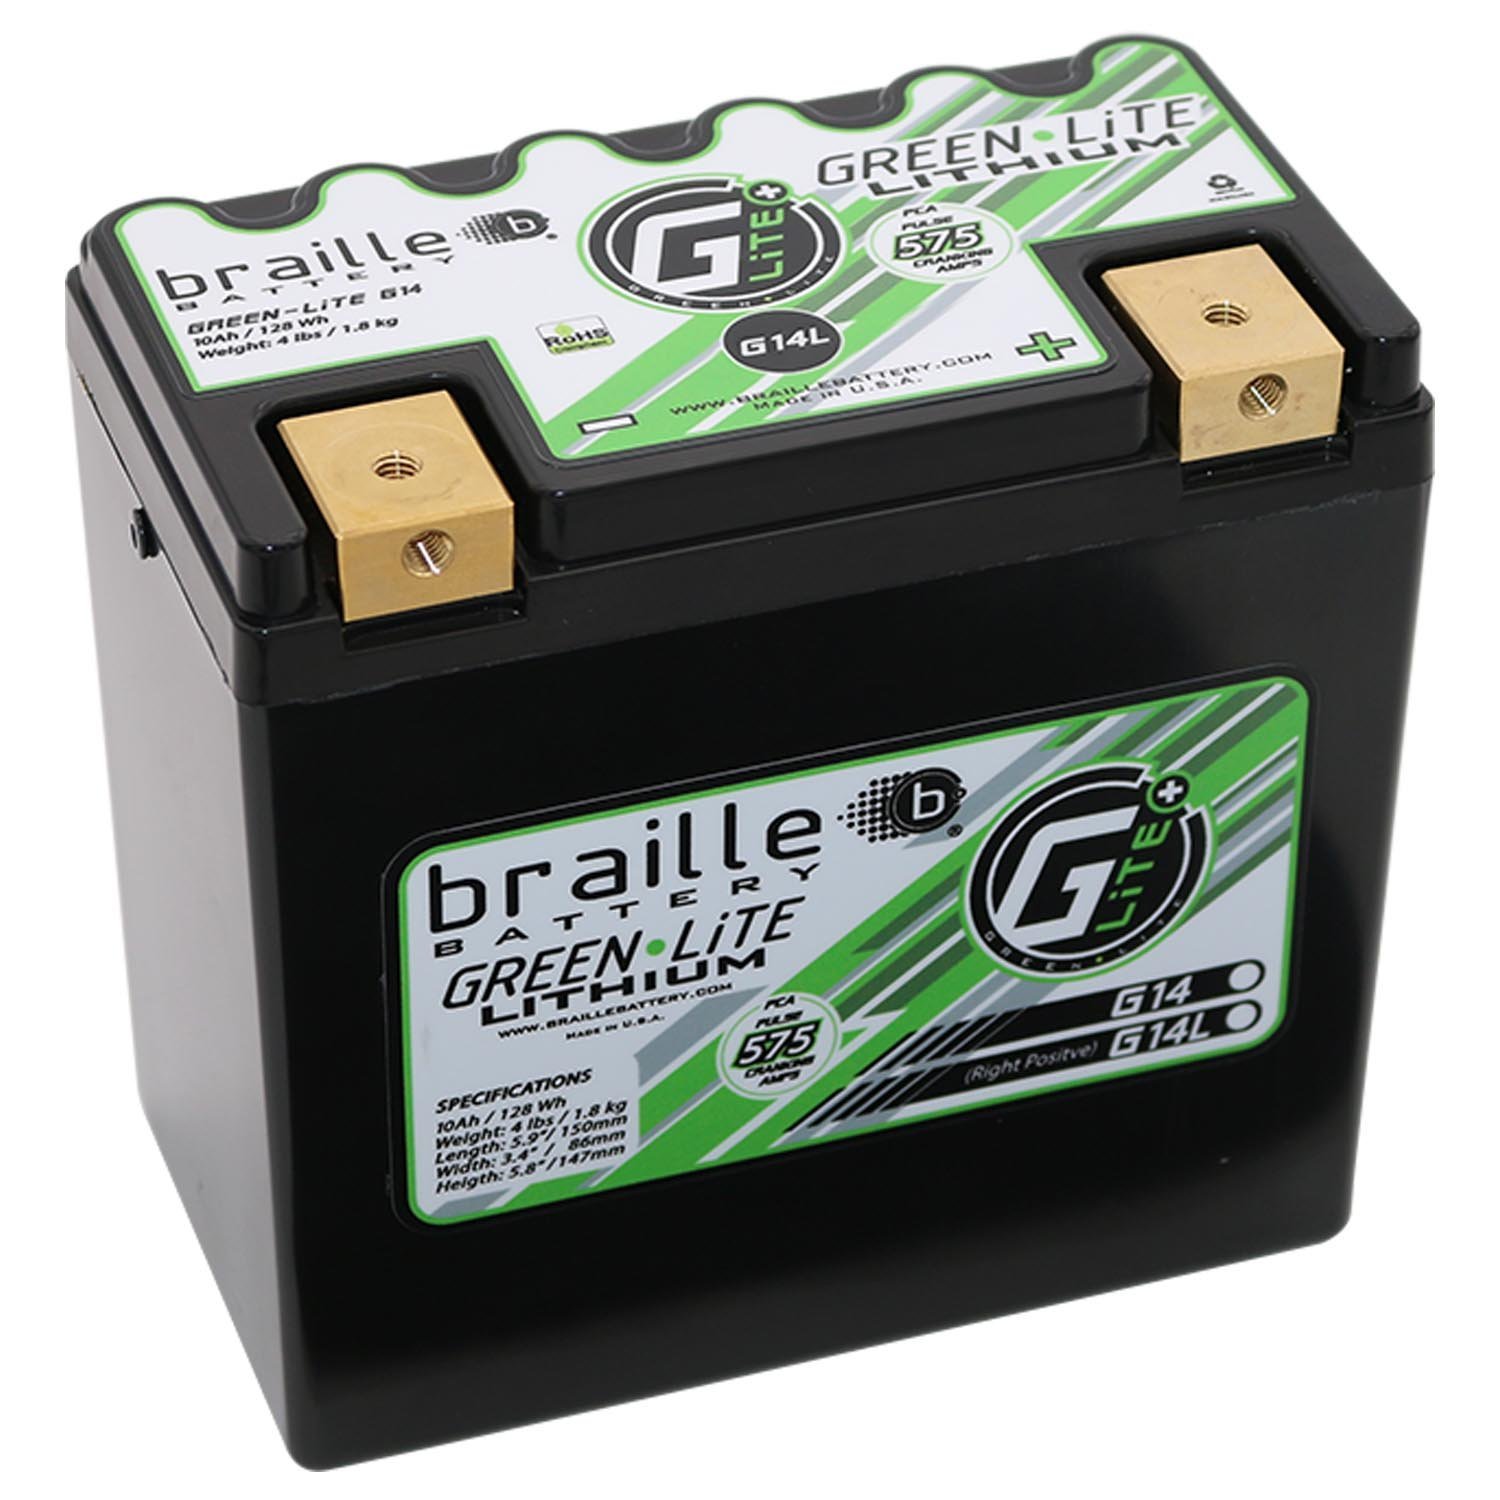 Green-Lite Lithium-Ion 12 V Powersports Battery, BCI Group: 14L, Pulse Cranking Amps (PCA): 575 - Right Side Positive Terminal